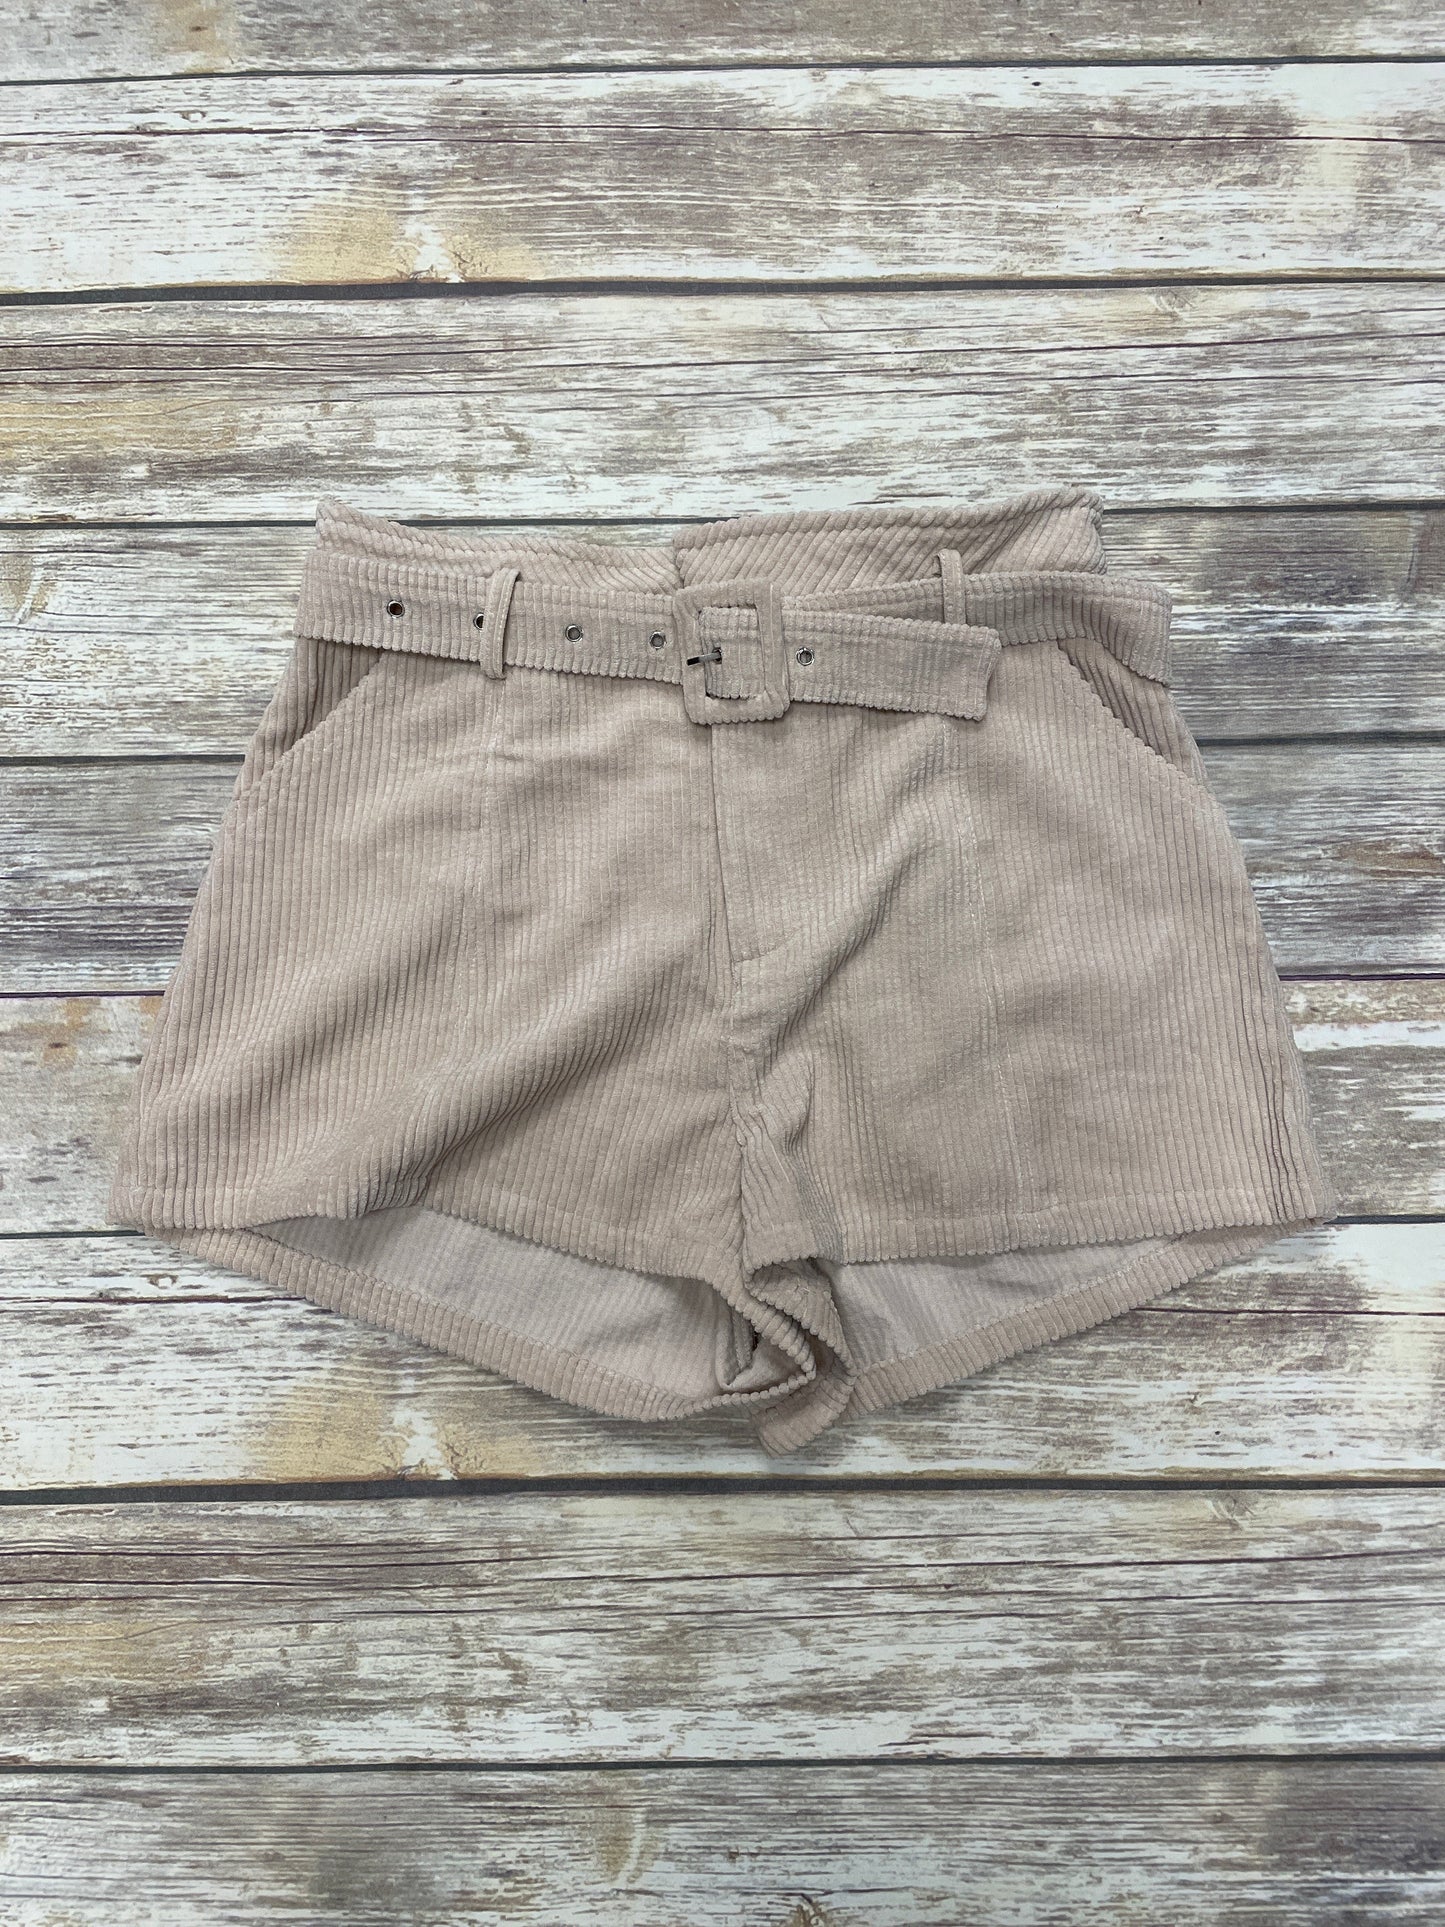 Shorts By Altard State  Size: M